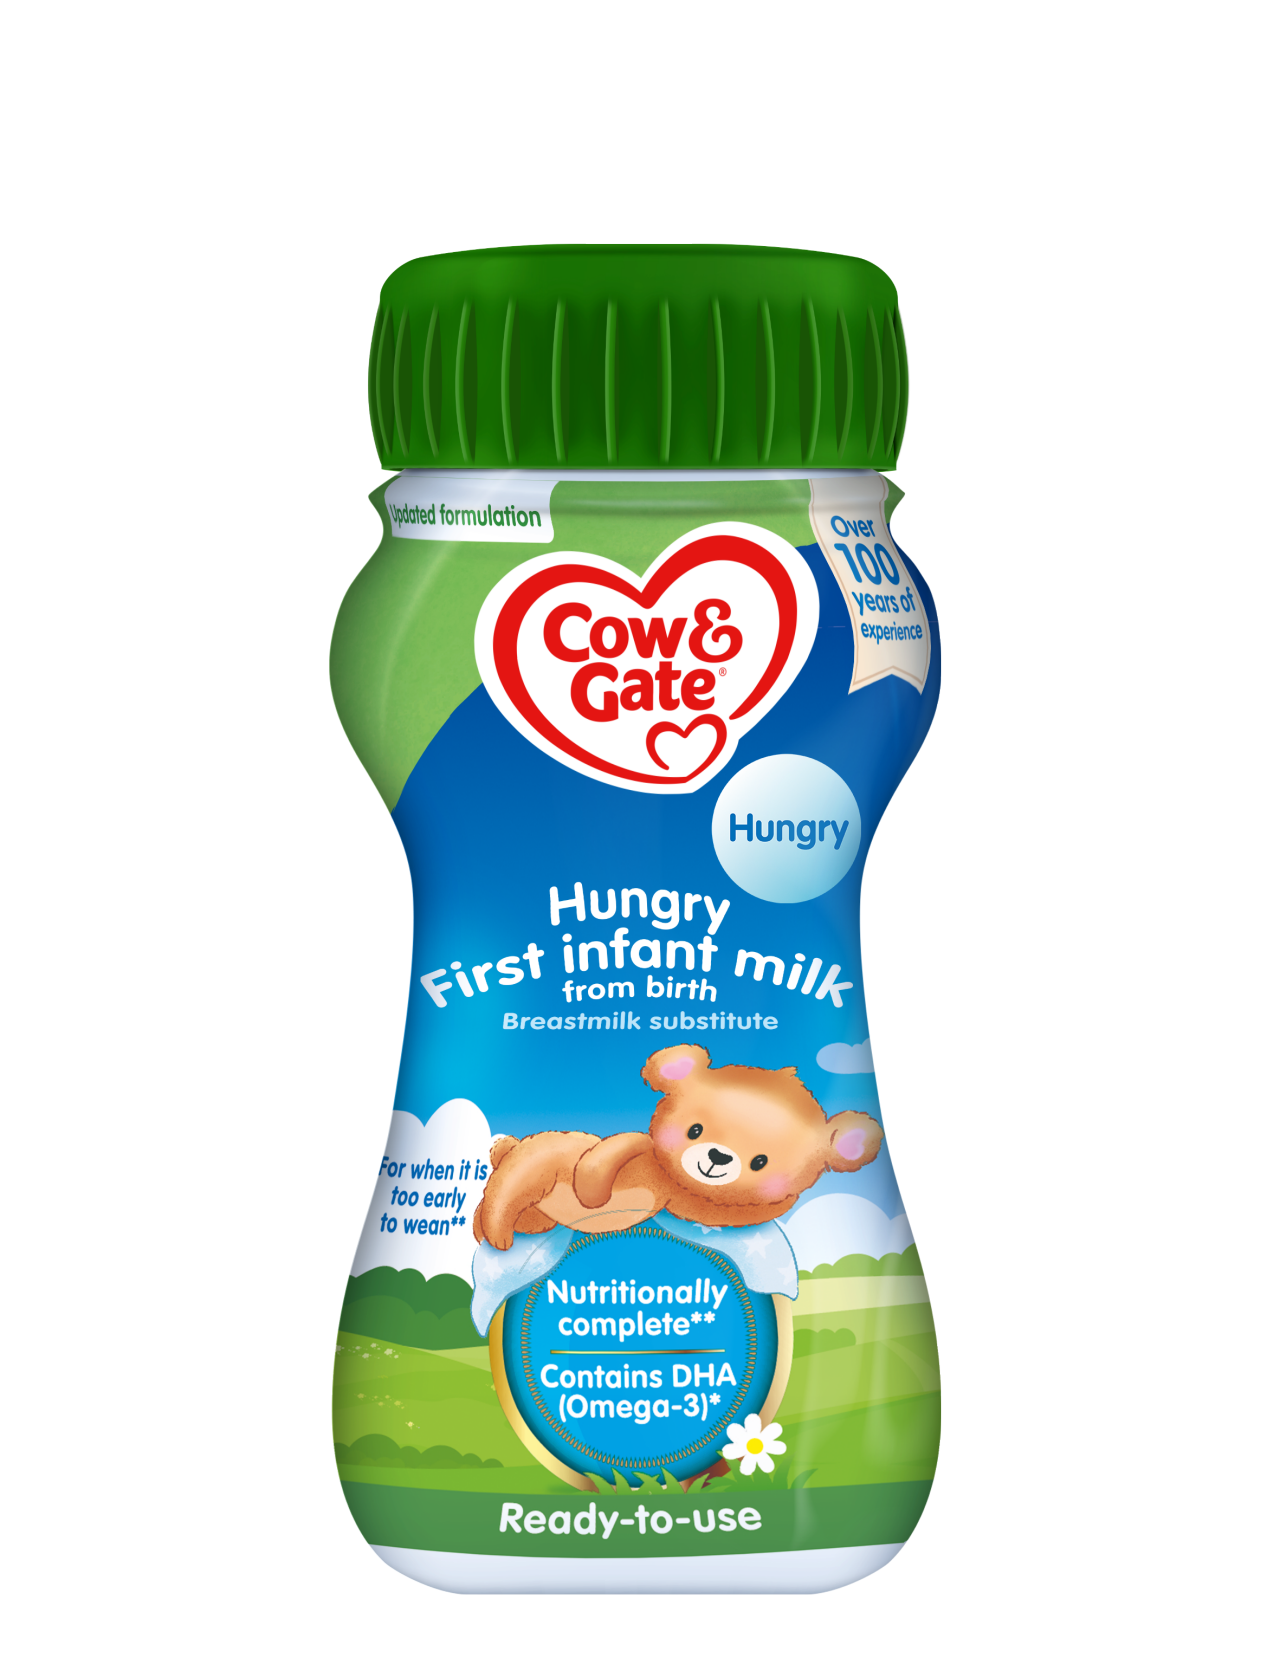 Cow & Gate Hungry First Infant milk (Liquid)